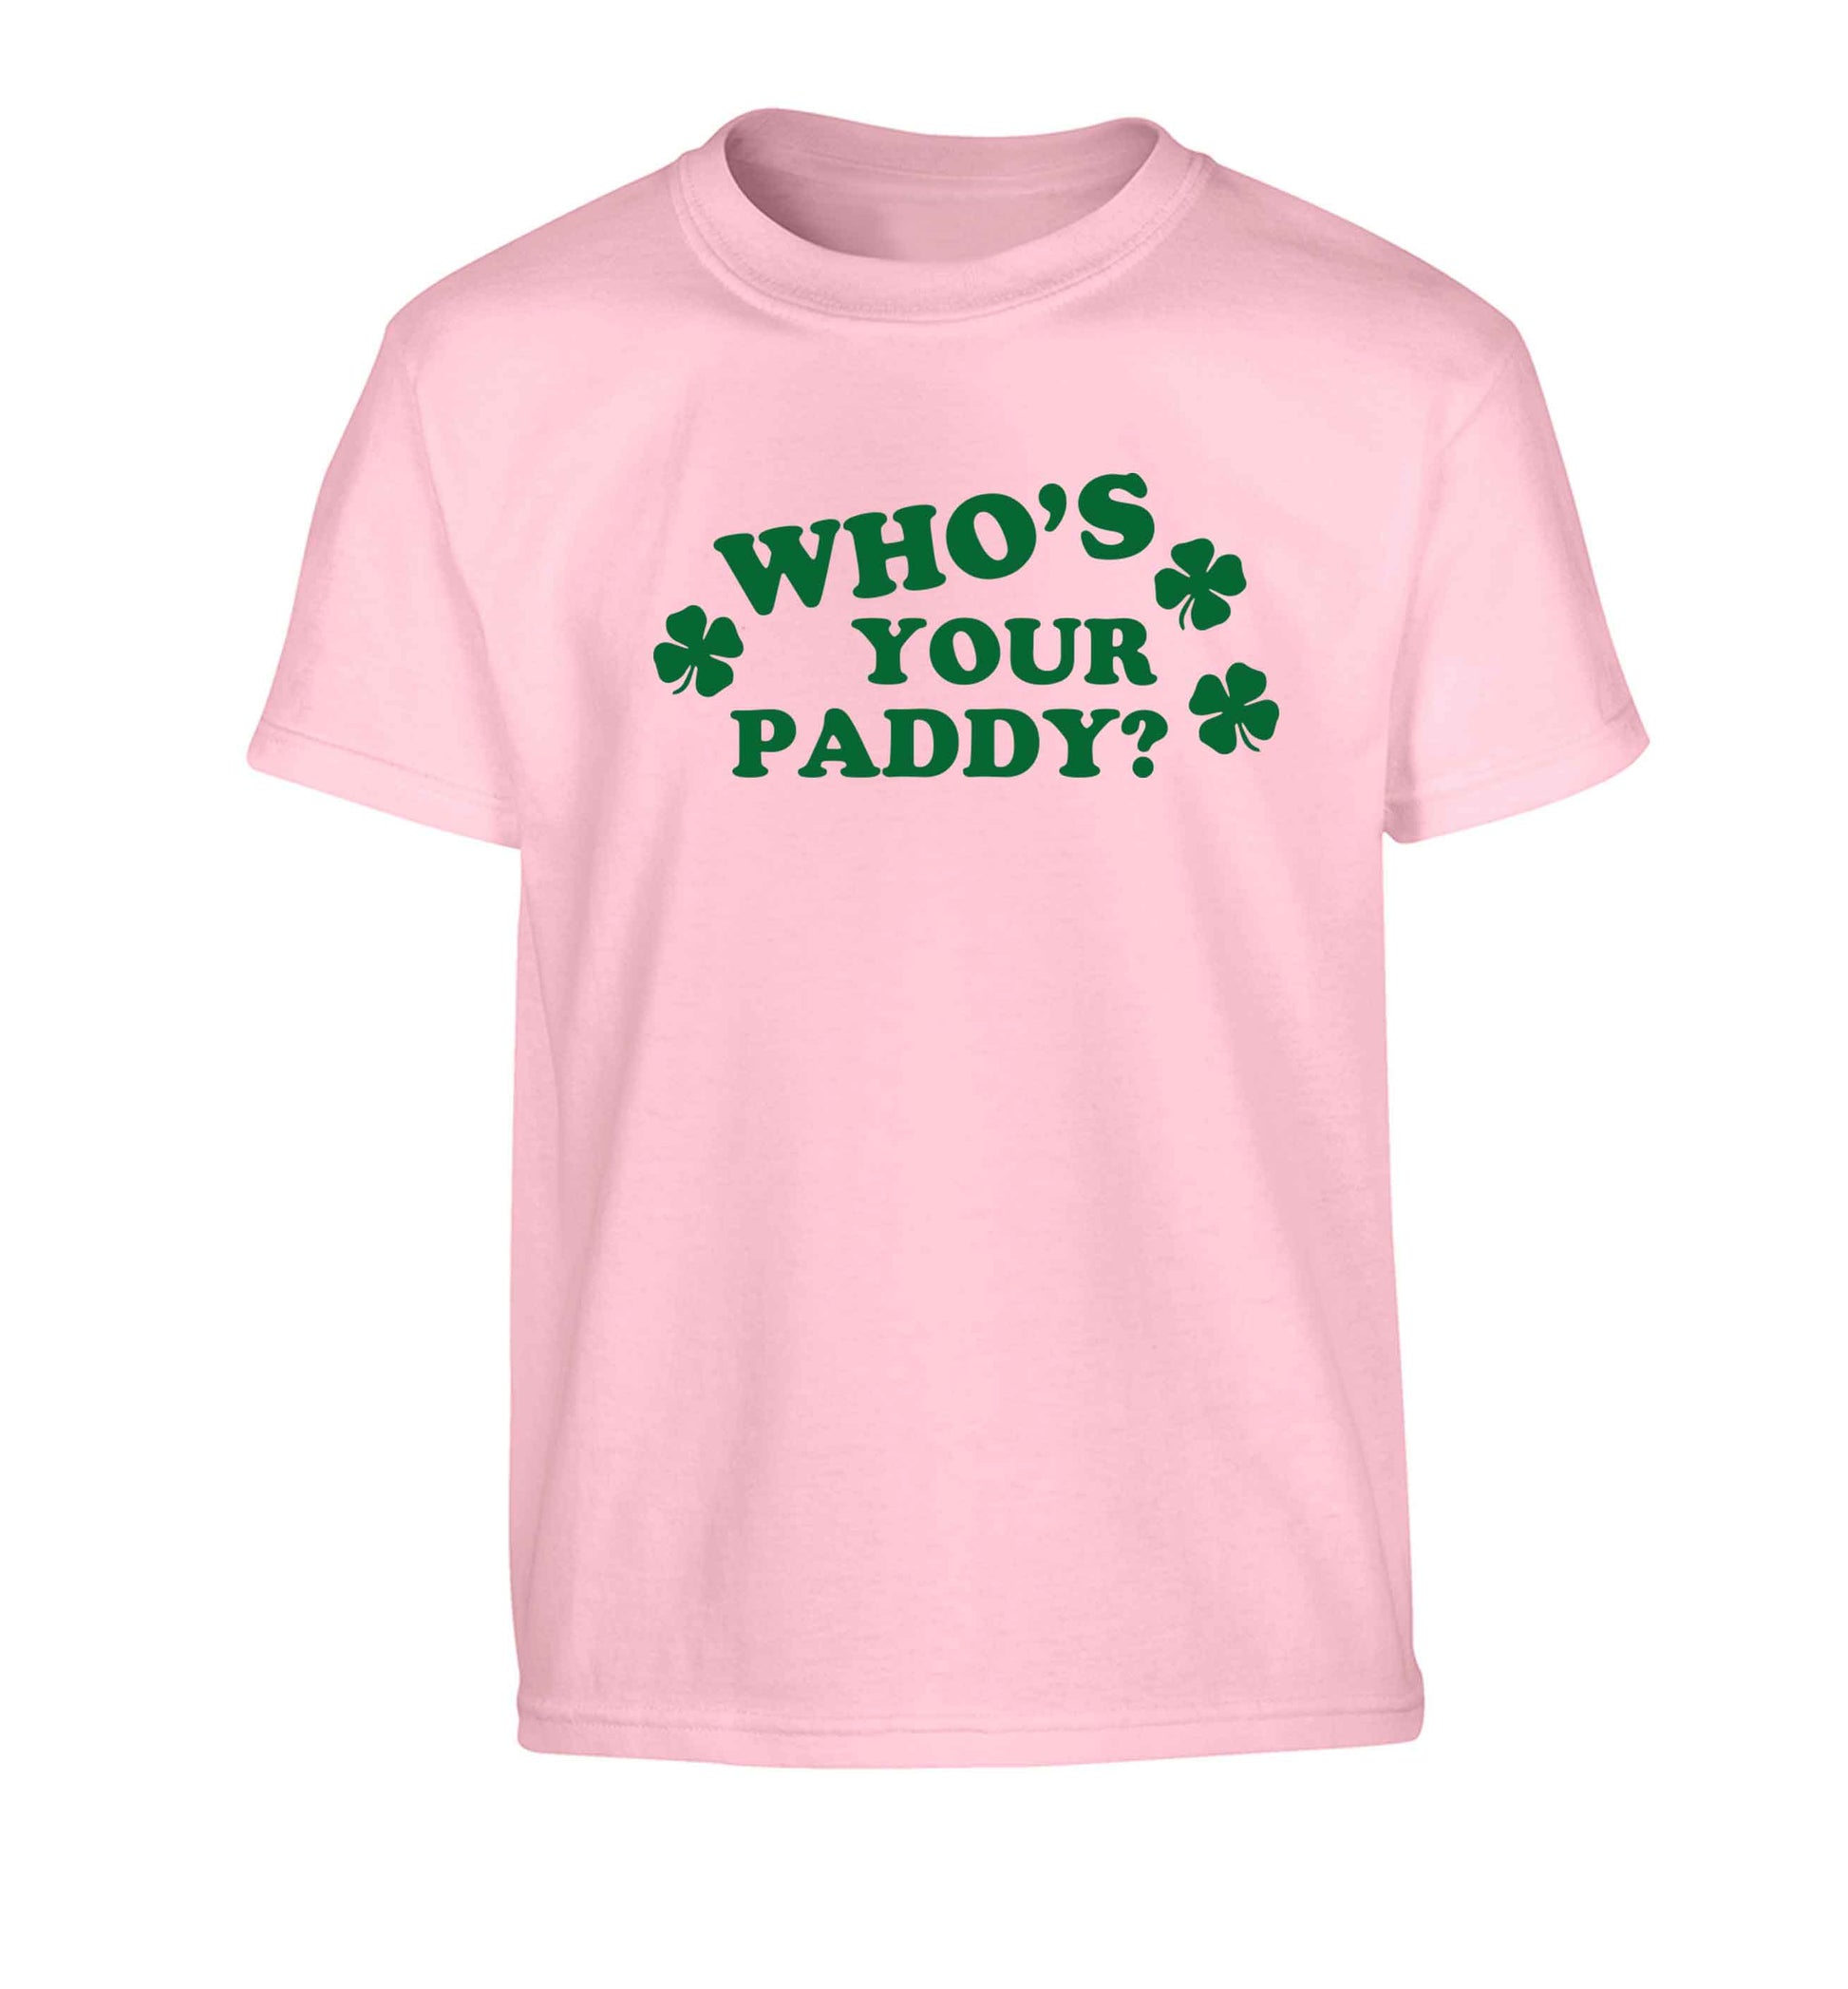 Who's your paddy? Children's light pink Tshirt 12-13 Years